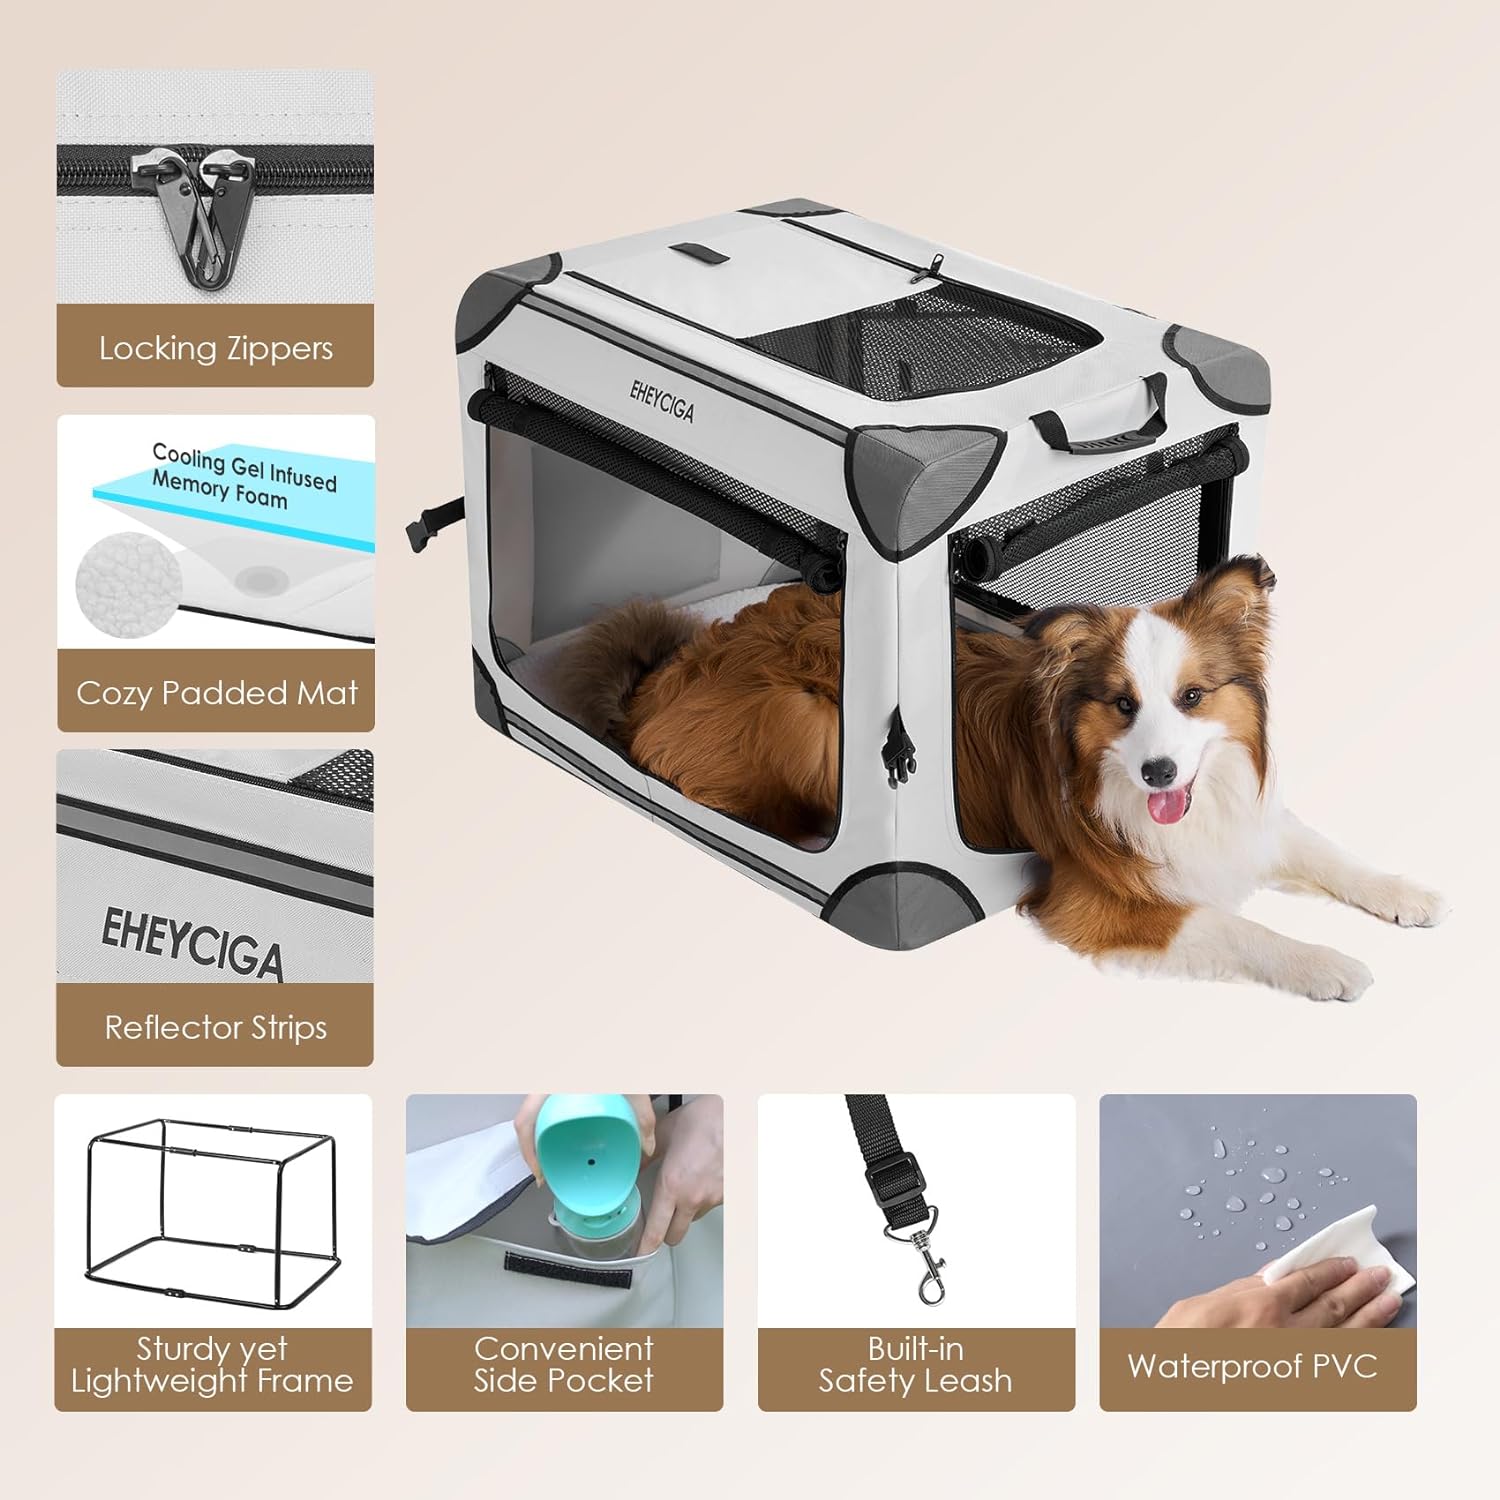 EHEYCIGA Collapsible Extra Large Dog Crate, 42 Inch Soft Portable - $65